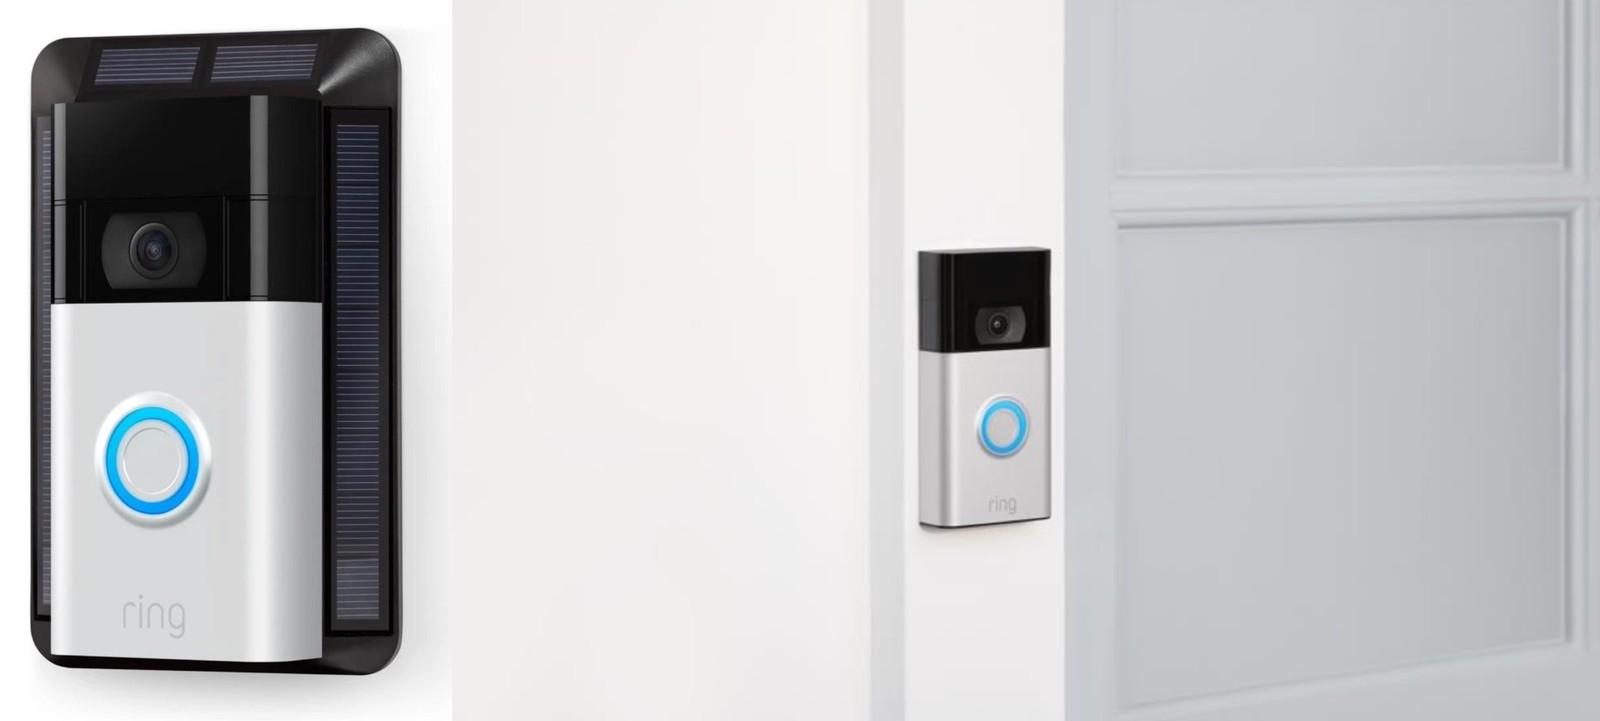 Ring Introduces Updated Video Doorbell With Improved Night Vision and